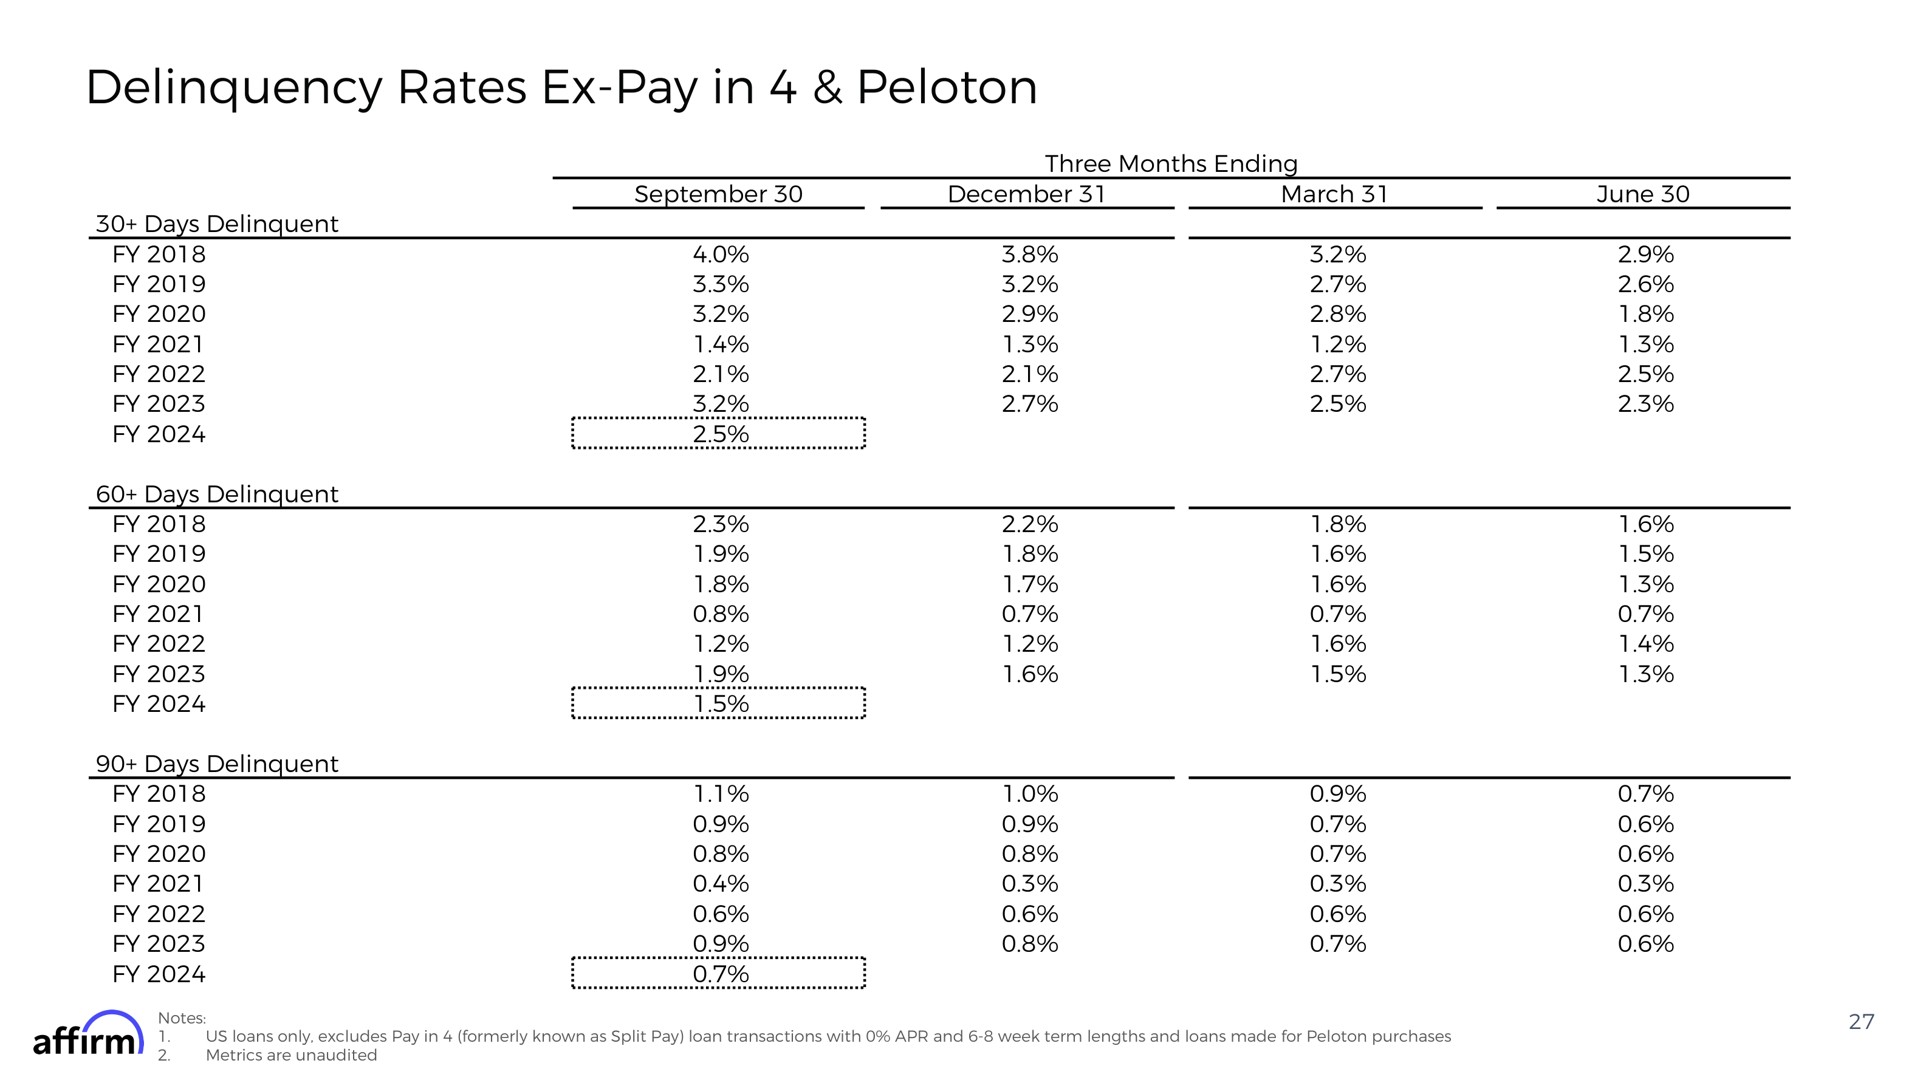 delinquency rates pay in peloton an | Affirm